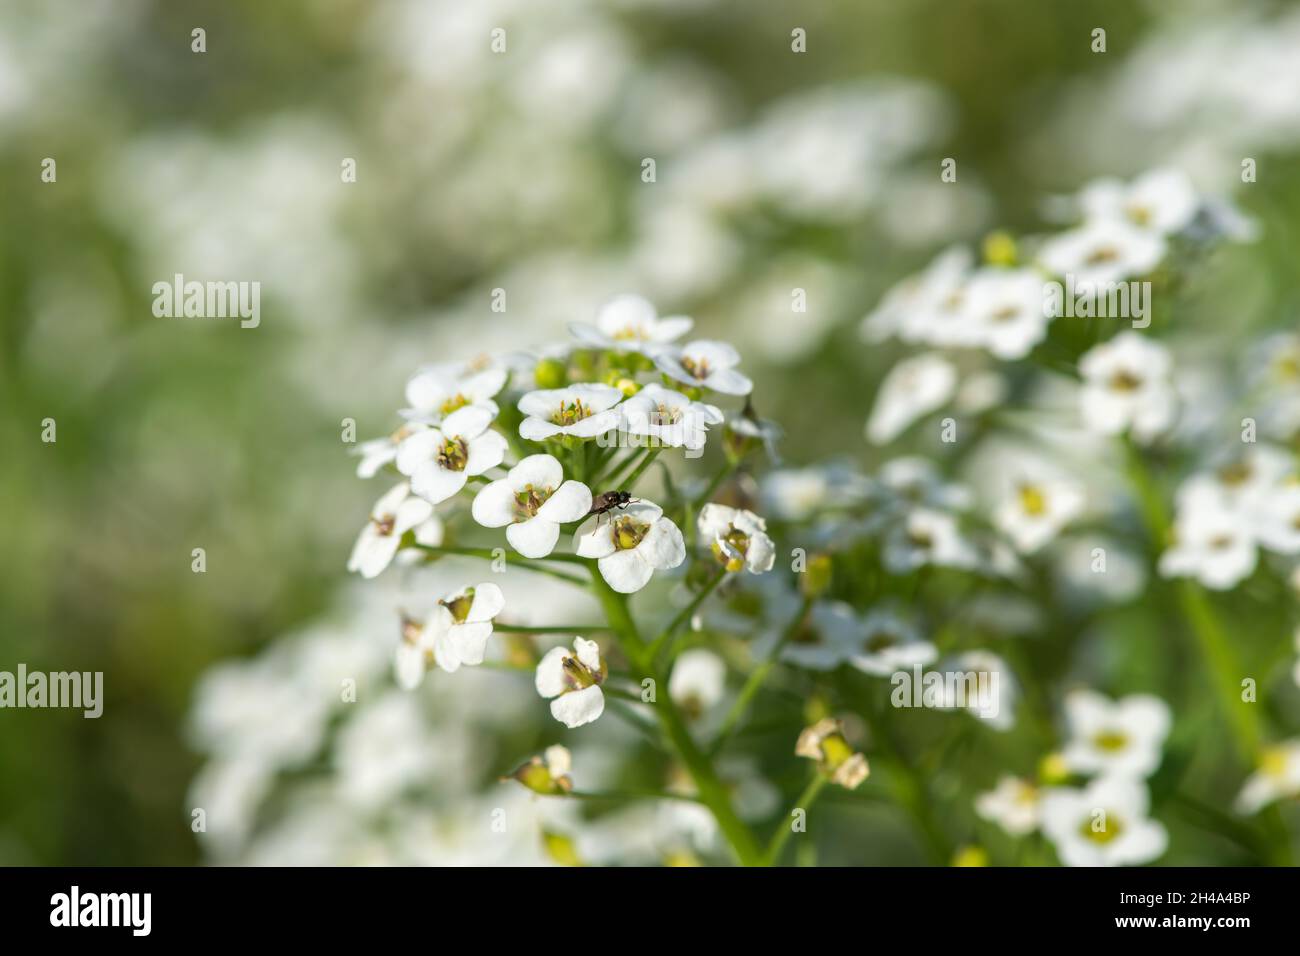 Close up of hornungia alpina flowers in bloom Stock Photo